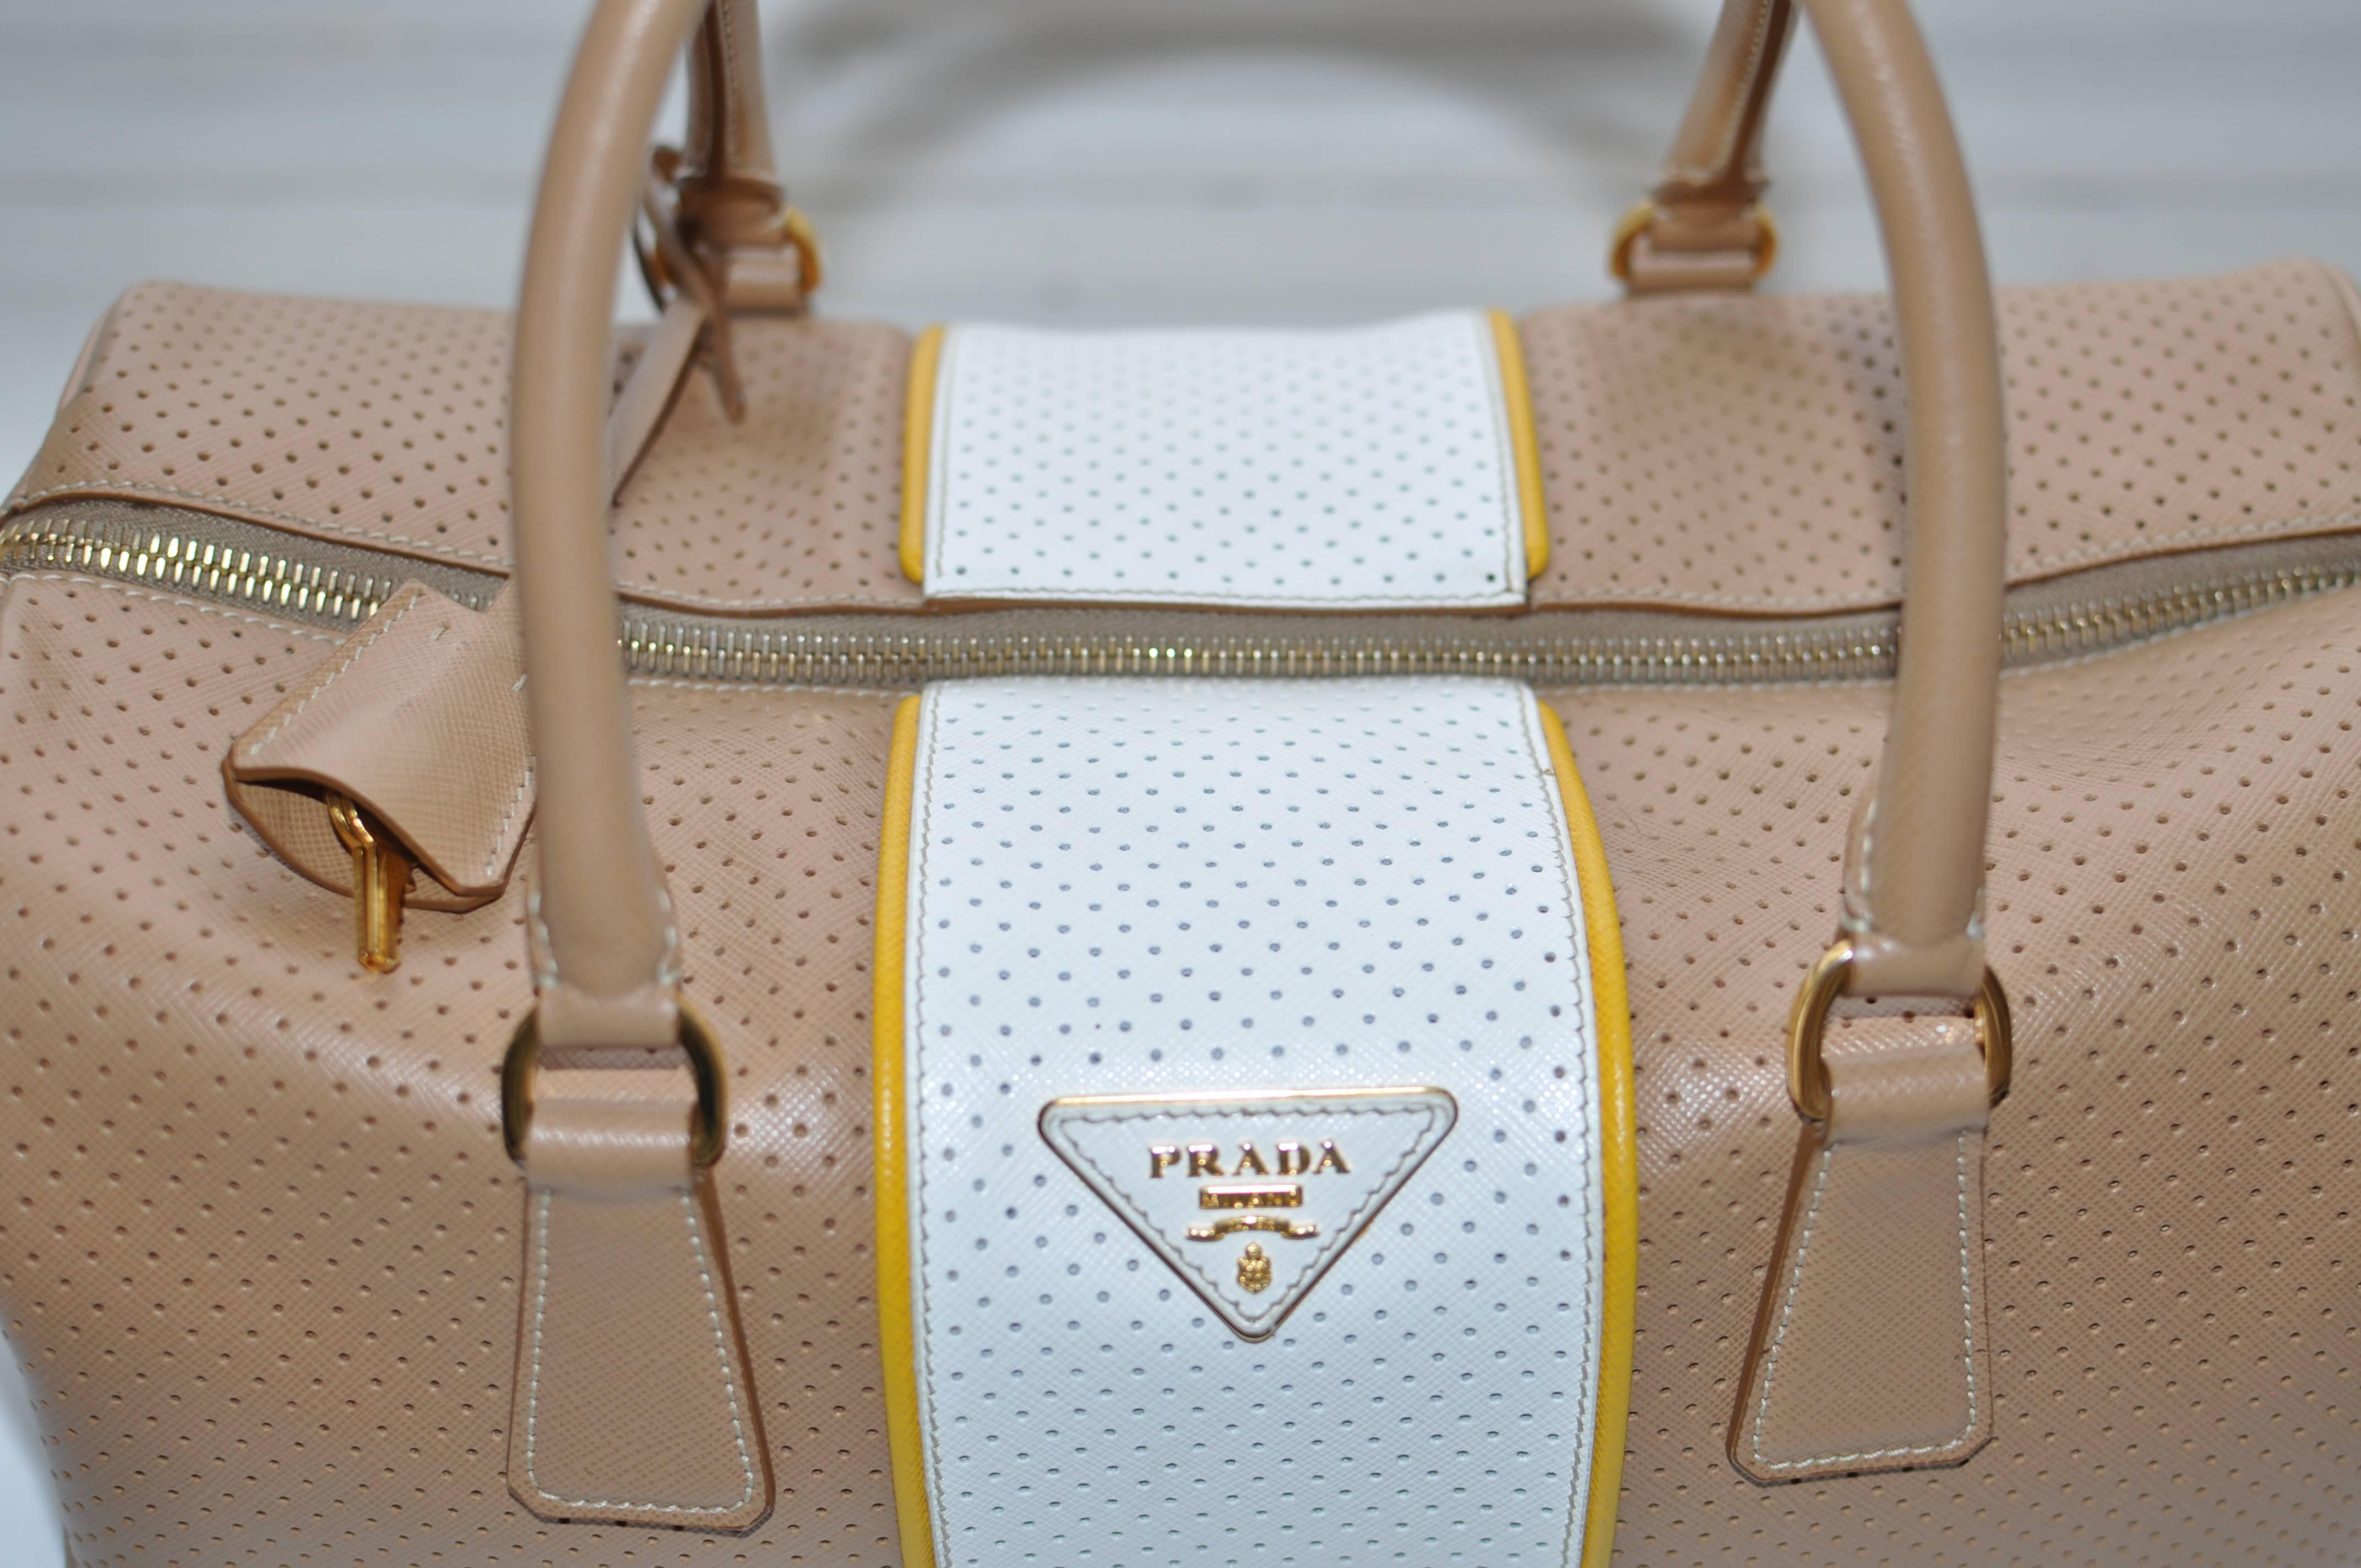 This white and beige perforated leather handbag has yellow stripping on either side the white band; nice gold colored hardware, including half moon raised feet; keys; lock and a dust bag. The interior is gold Prada logo with the Prada plaque on the